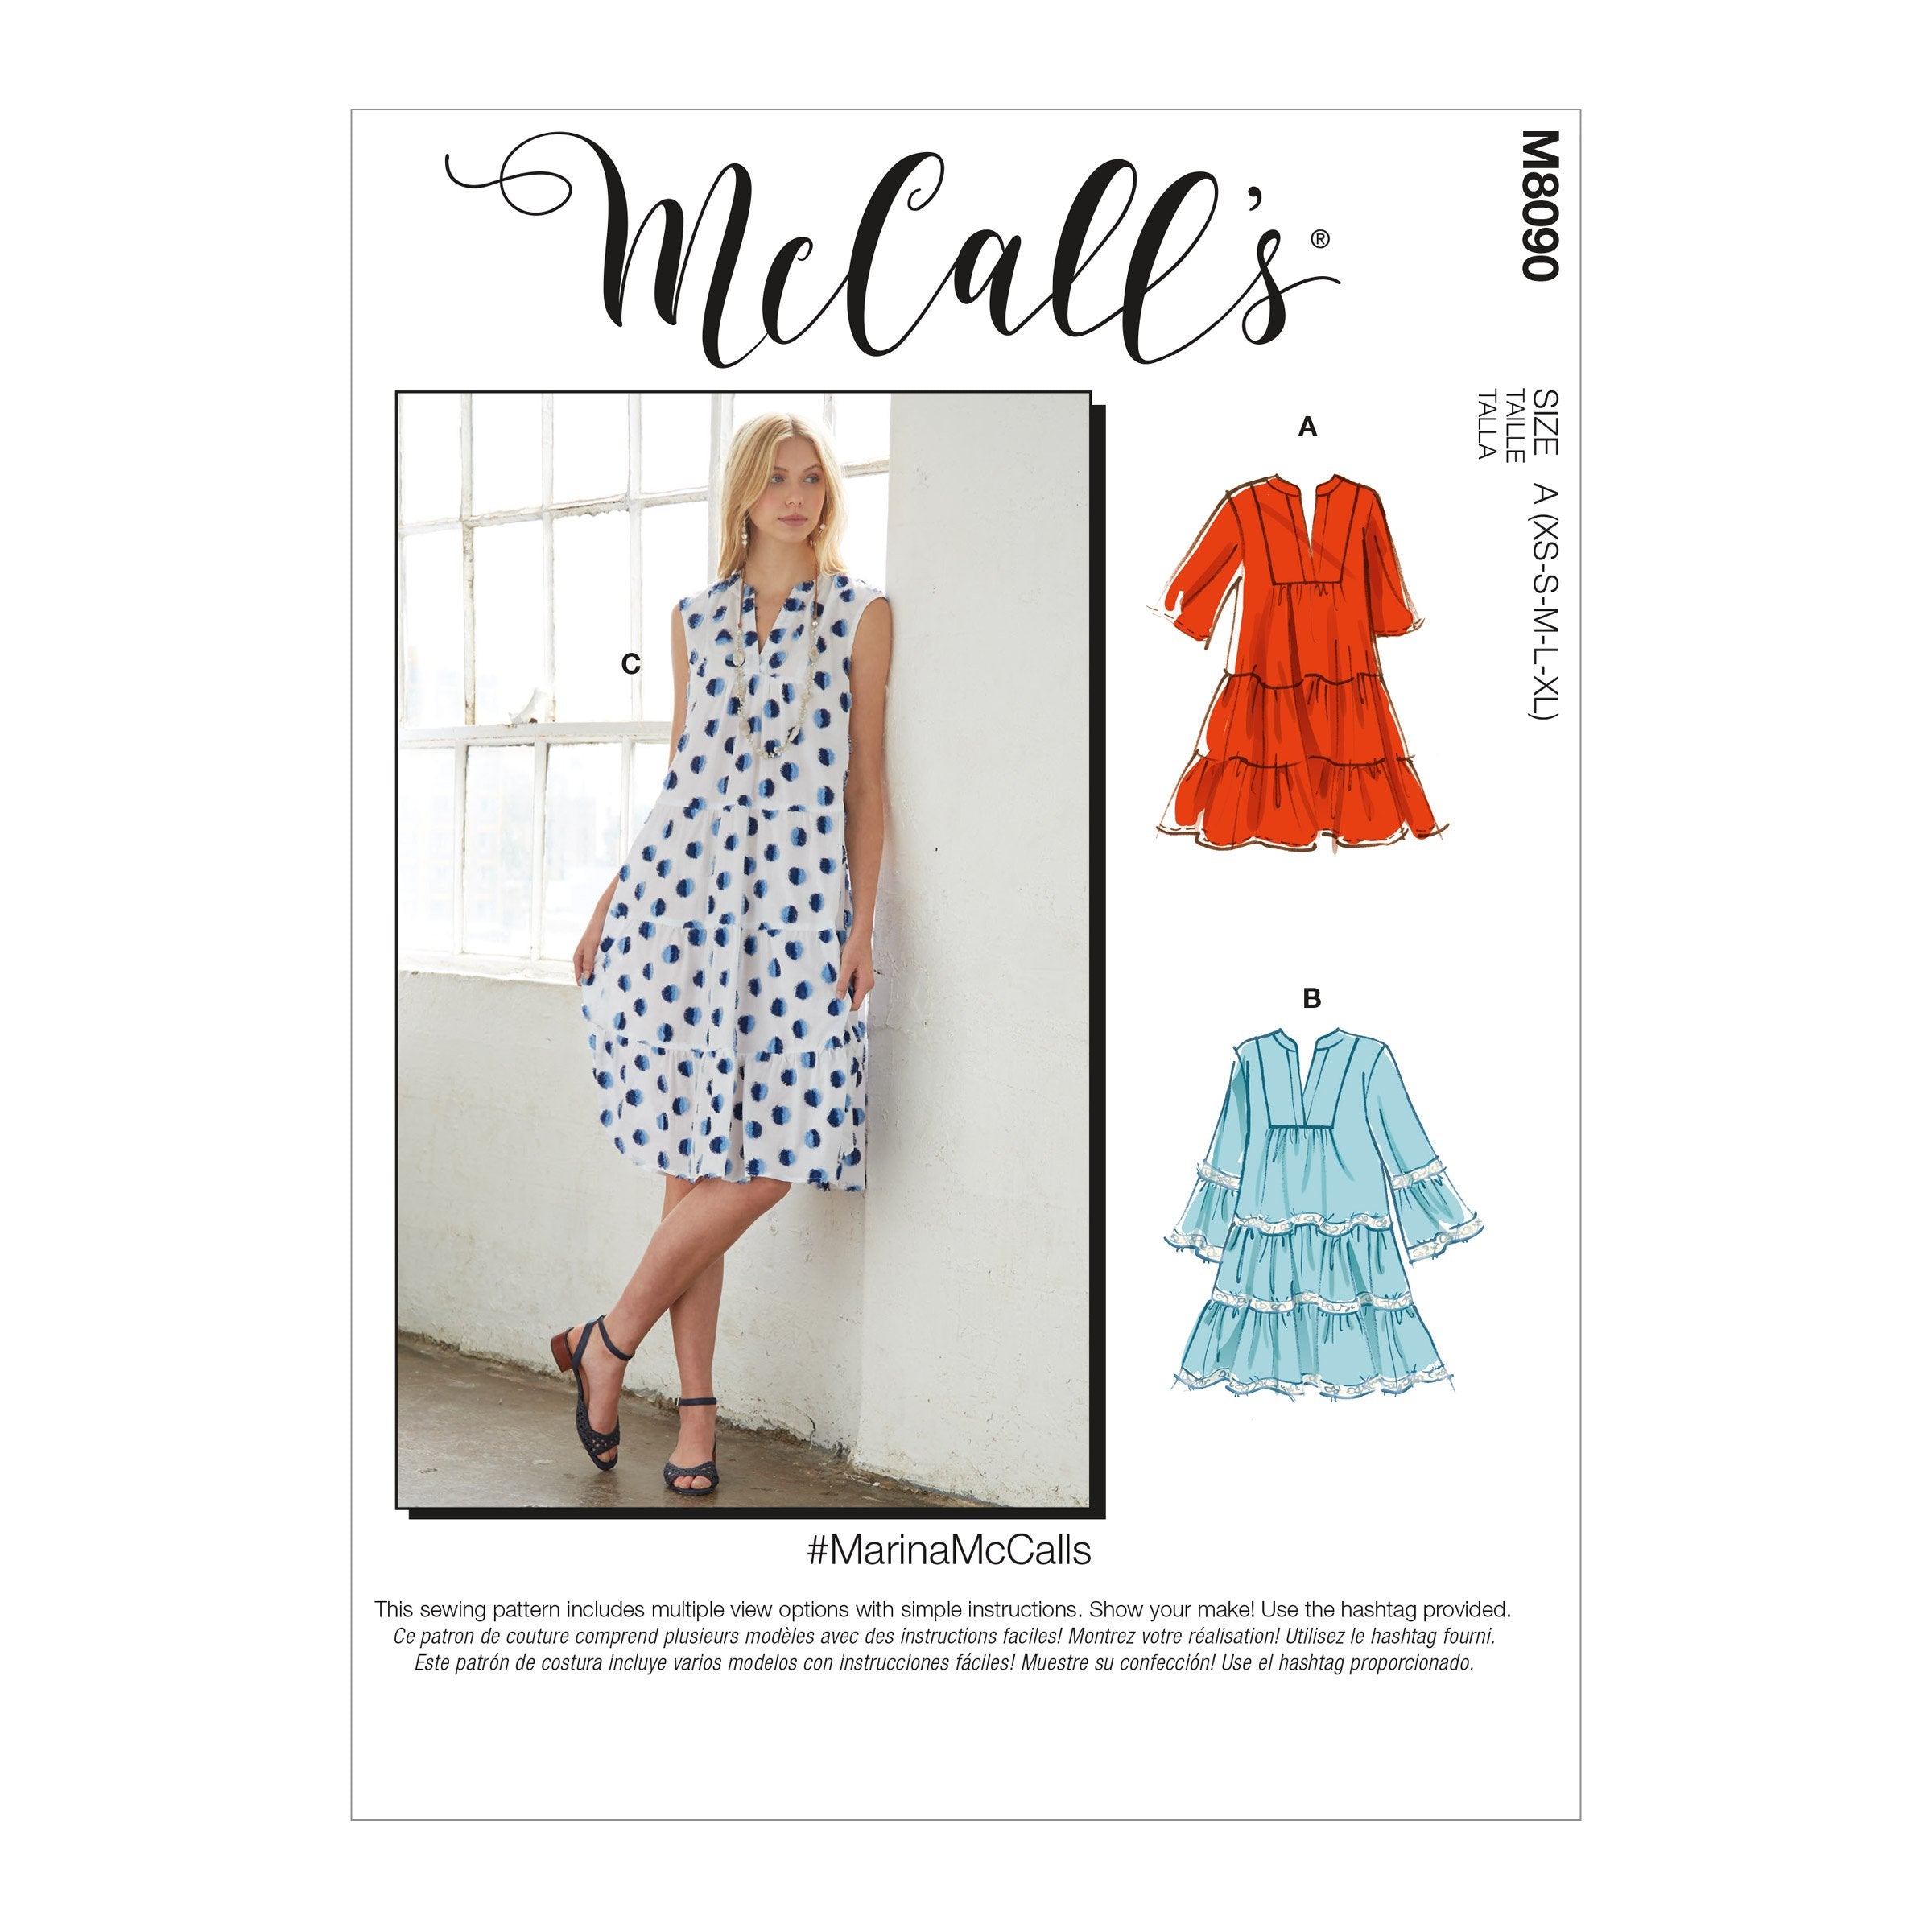 McCall's 8090 Dresses and Belt sewing pattern #MarinaMcCalls from Jaycotts Sewing Supplies